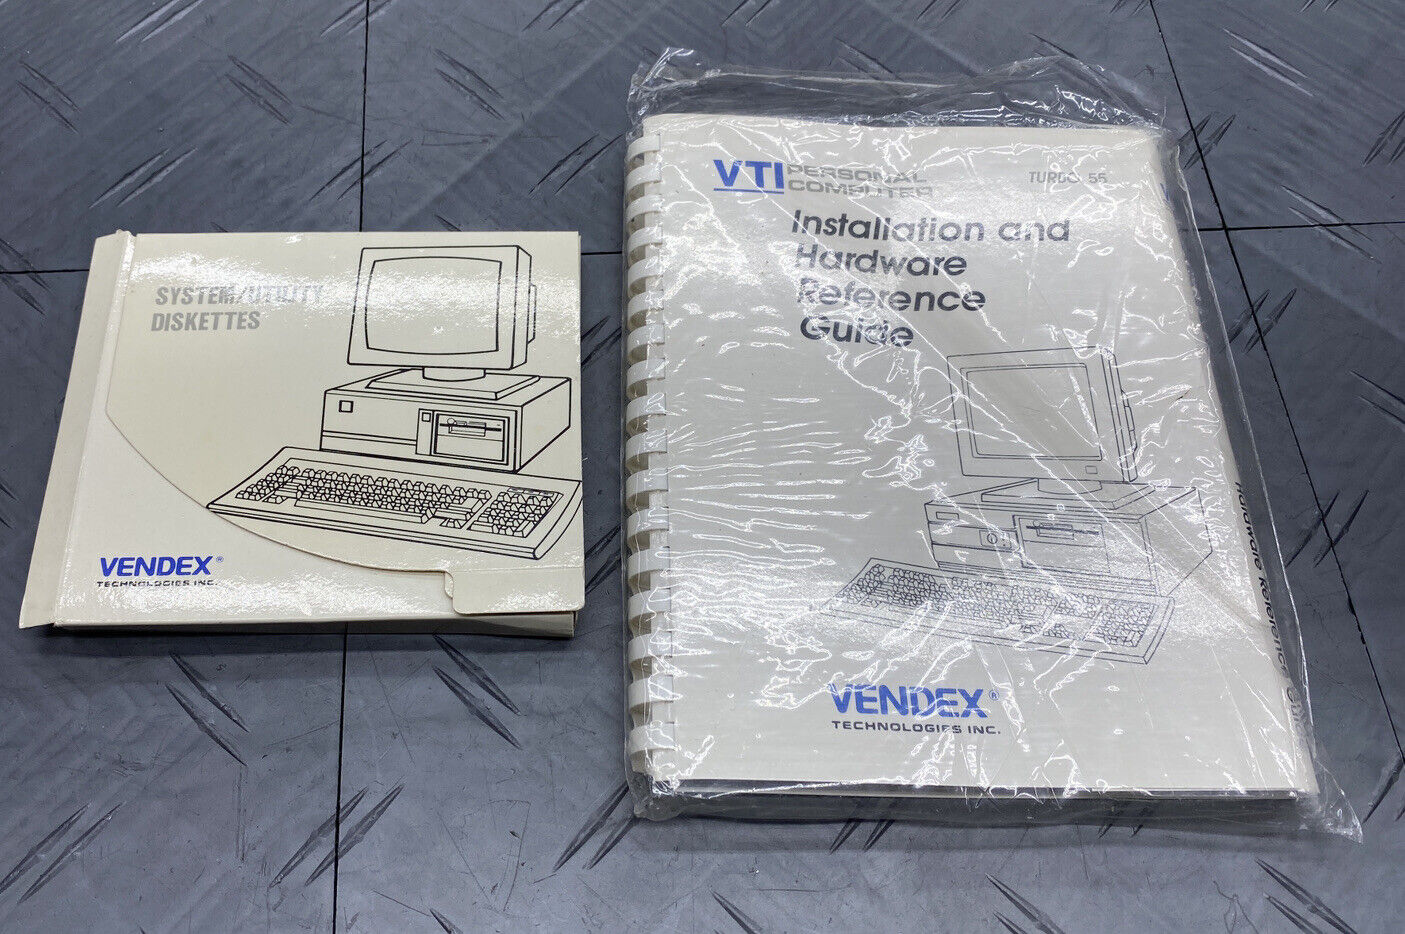 VTI Computer Installation Reference Guide Turbo 55 + System / Utility Diskettes